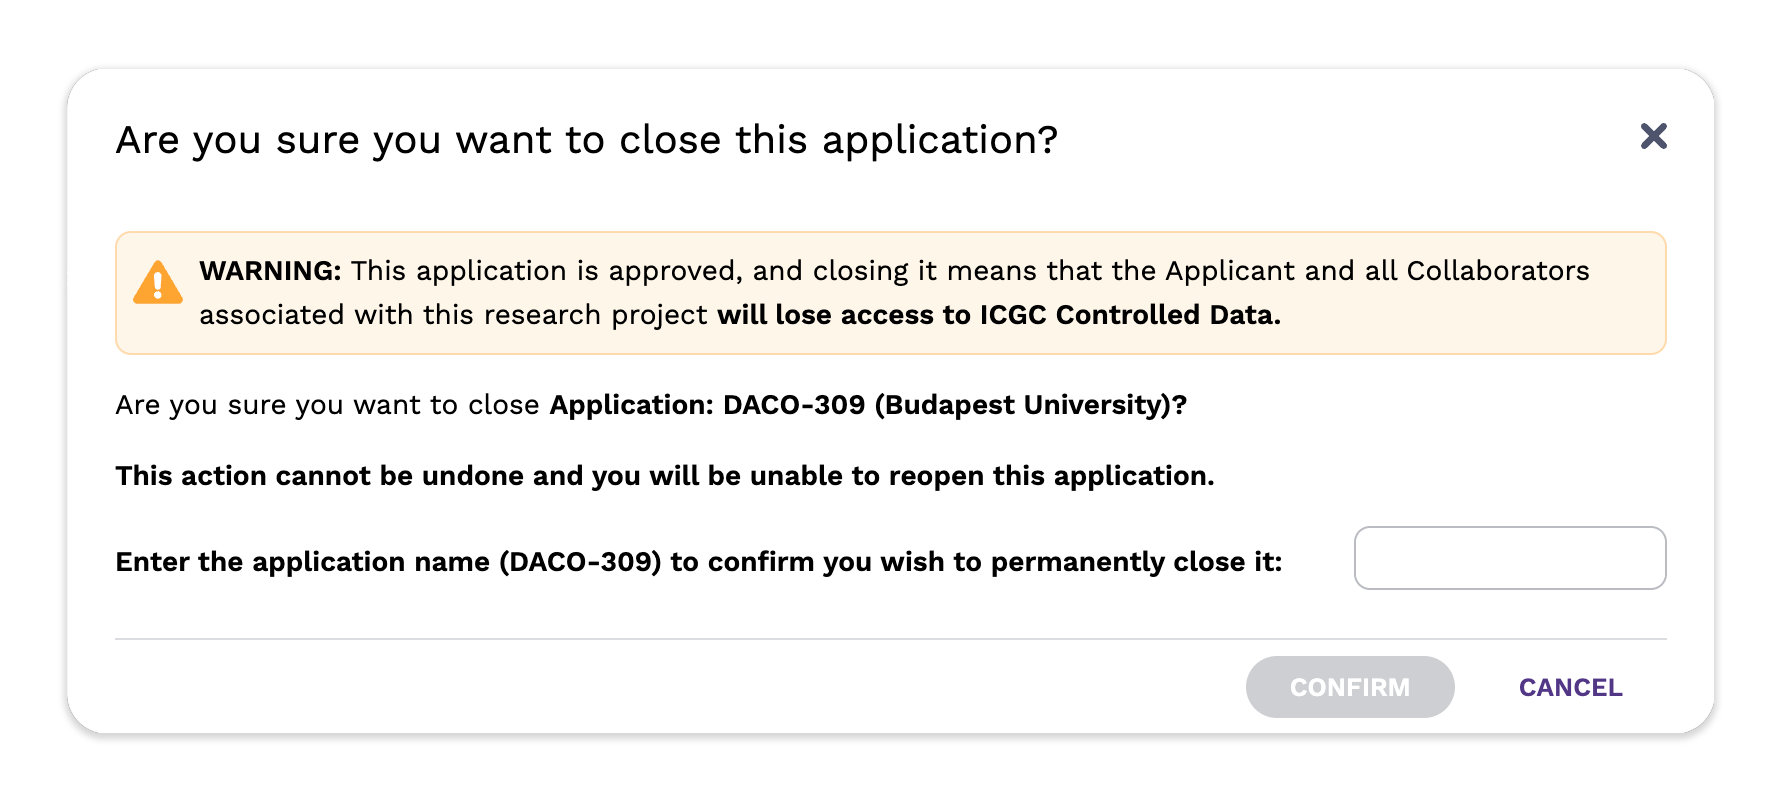 DACO close confirmation modal with manual entry requirement and warning